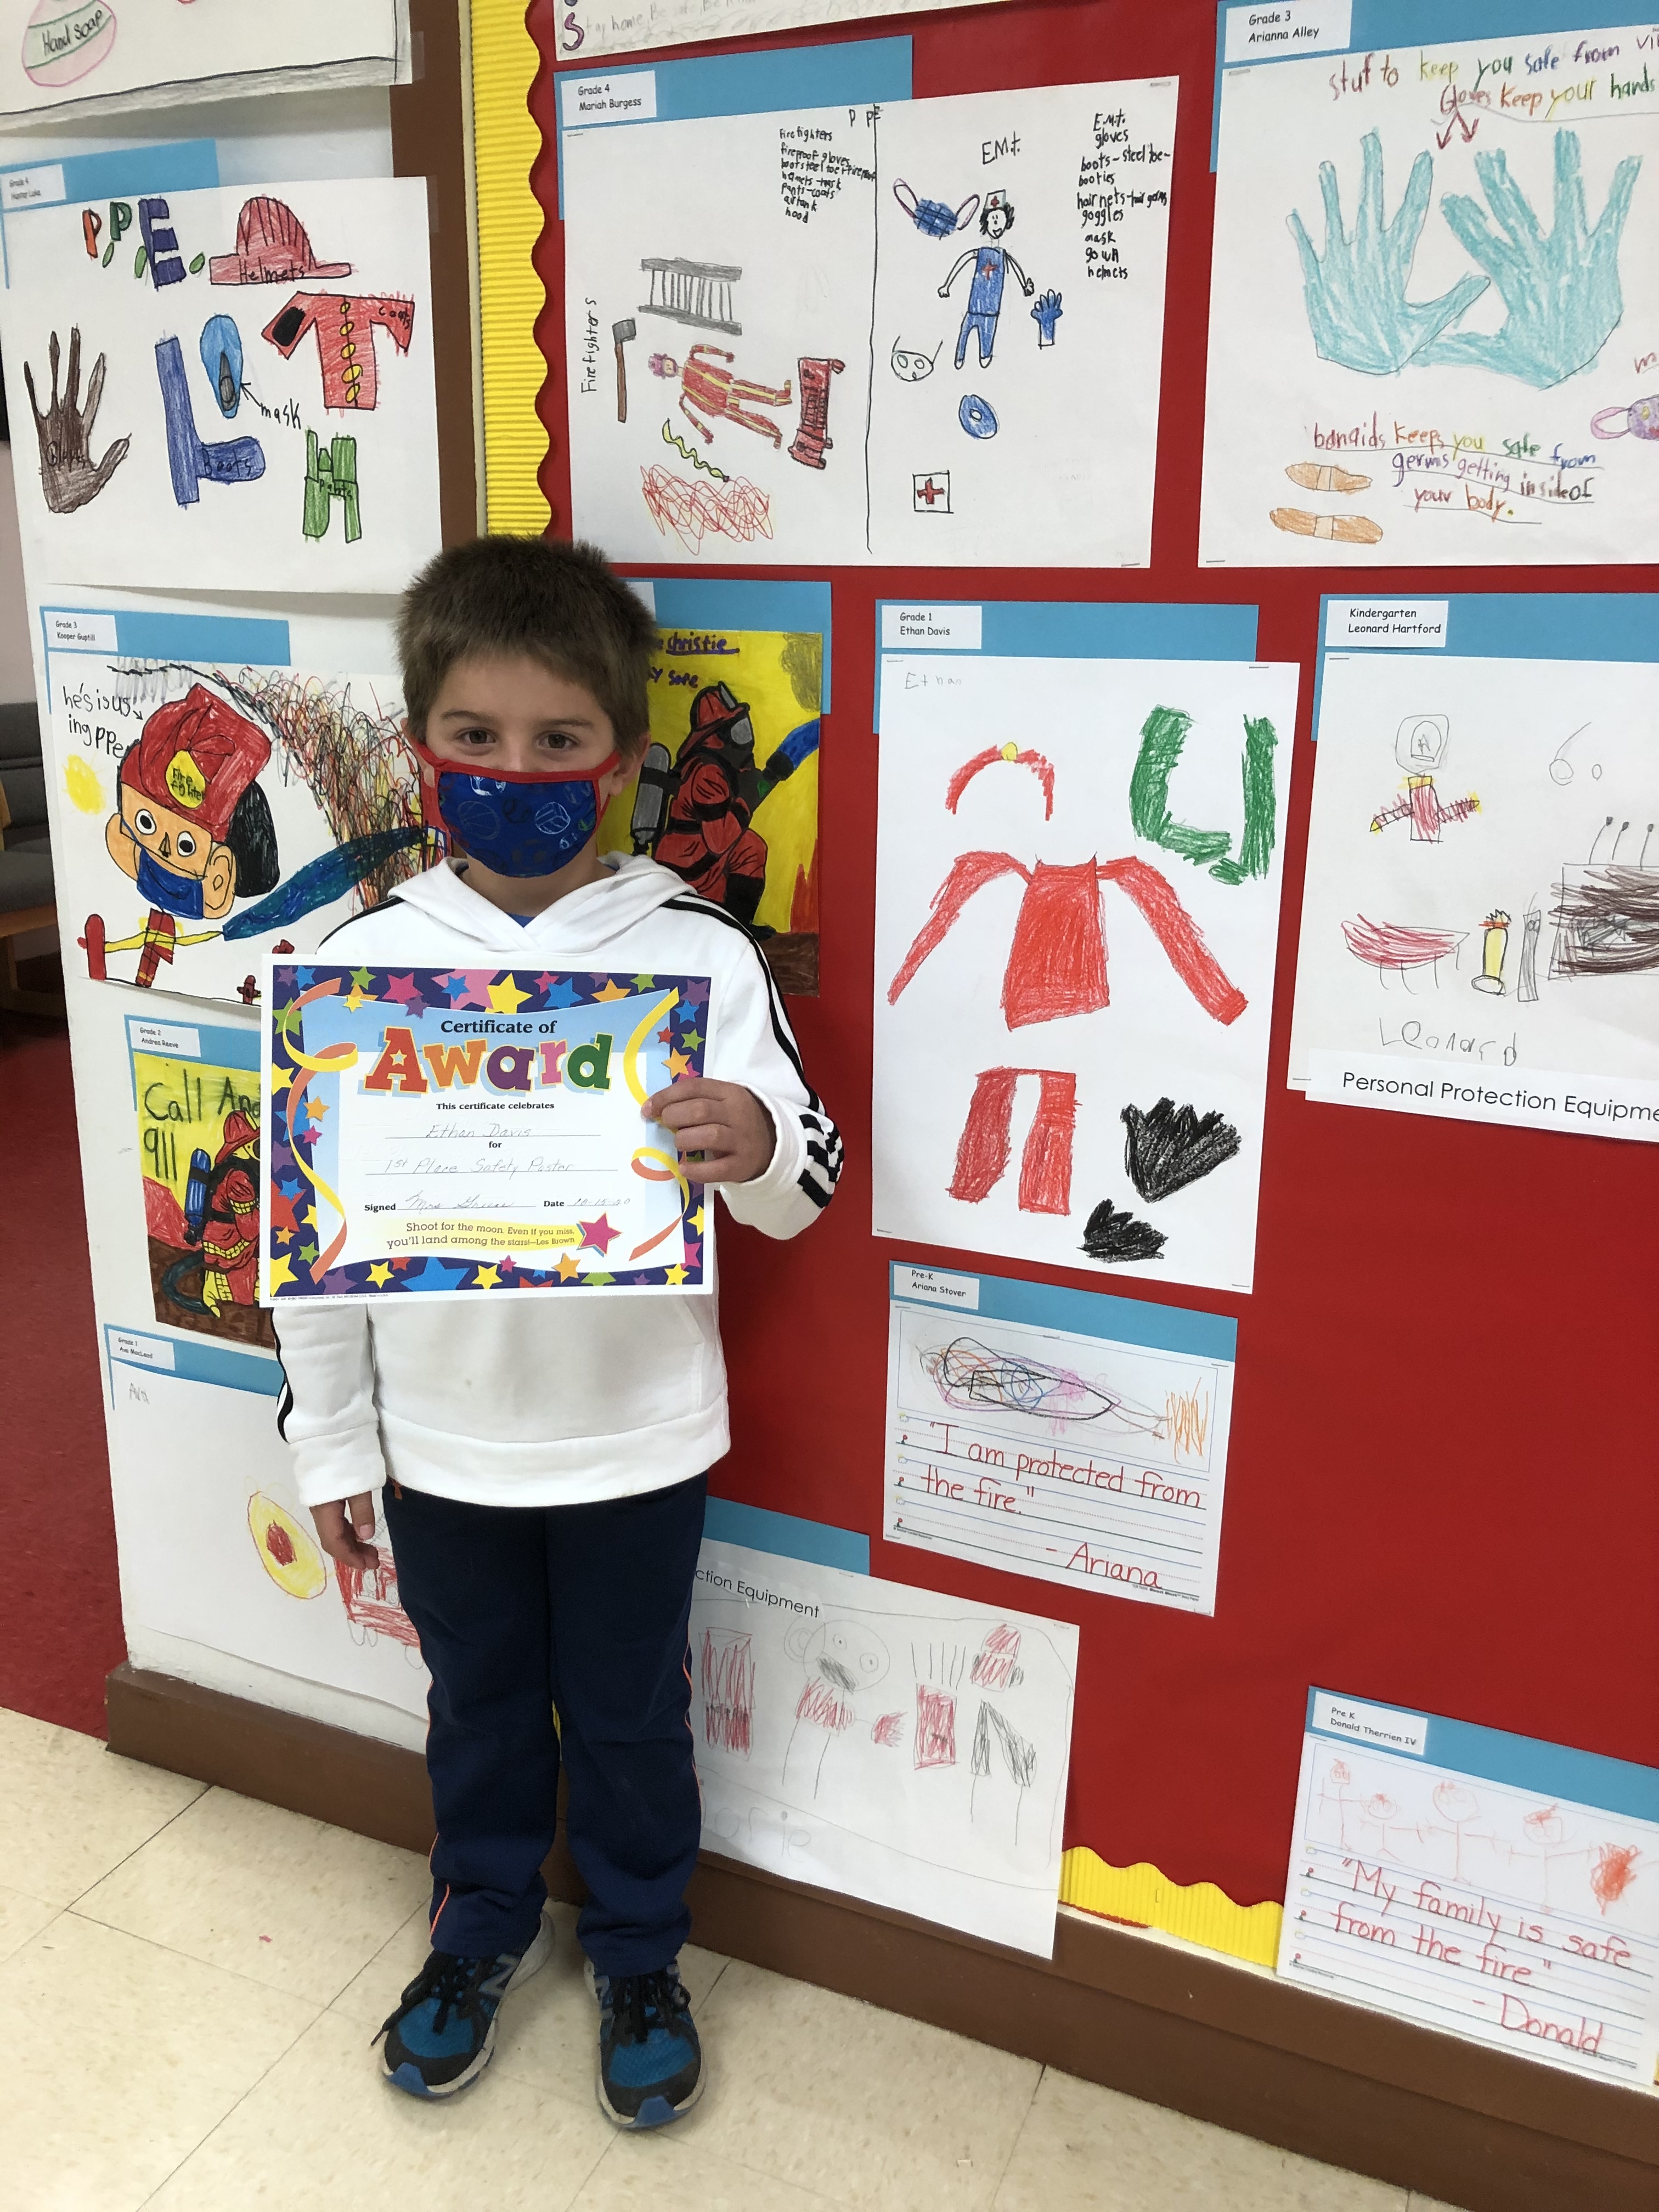 X 上的 SS Peter & Paul JNS：「For Fire Safety Week the children were asked to  create a Fire Safety Poster. Well done to our fire safety competition  winners, hopefully their entries will